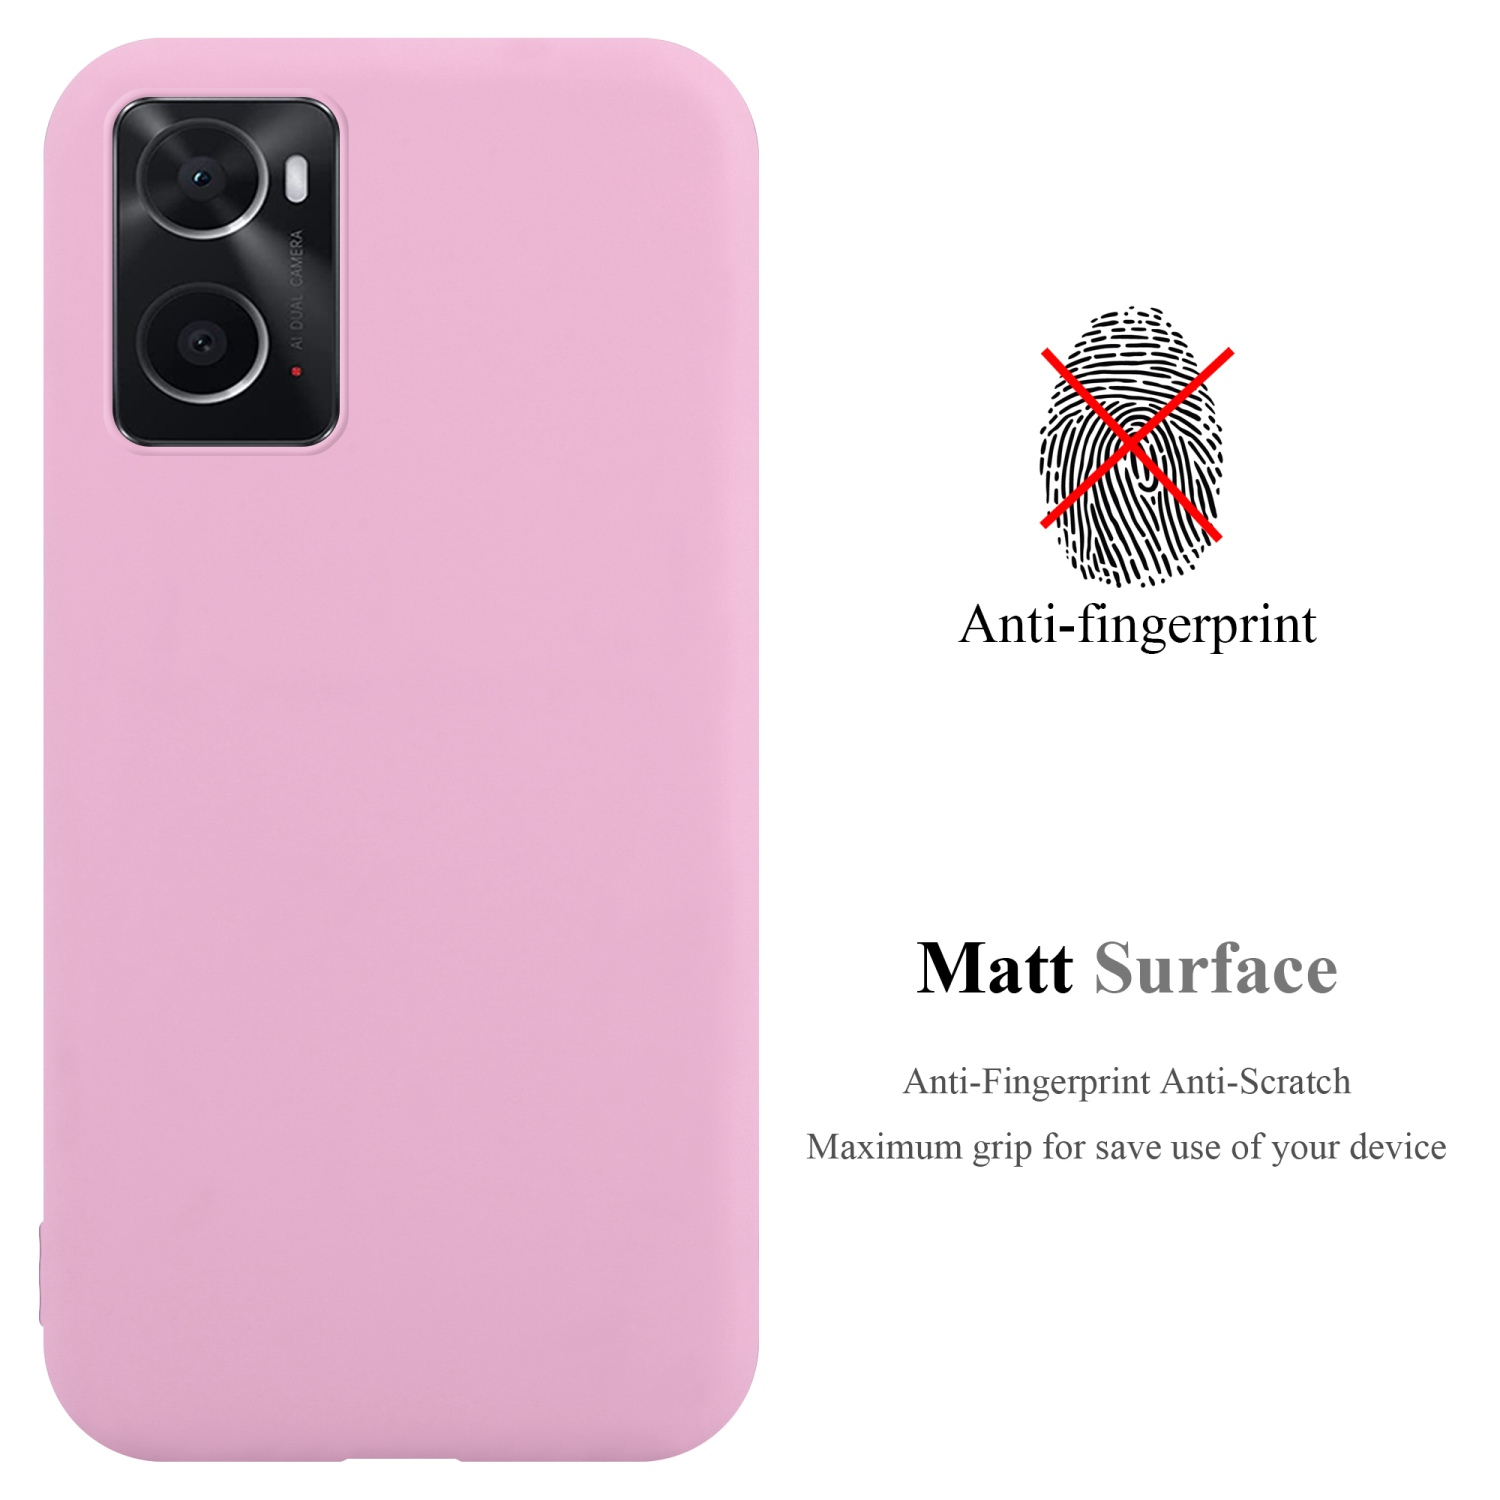 4G Realme K10 Backcover, Style, Hülle A76 A36 9i, TPU / Candy / CADORABO ROSA / 4G / im A96 Oppo, CANDY